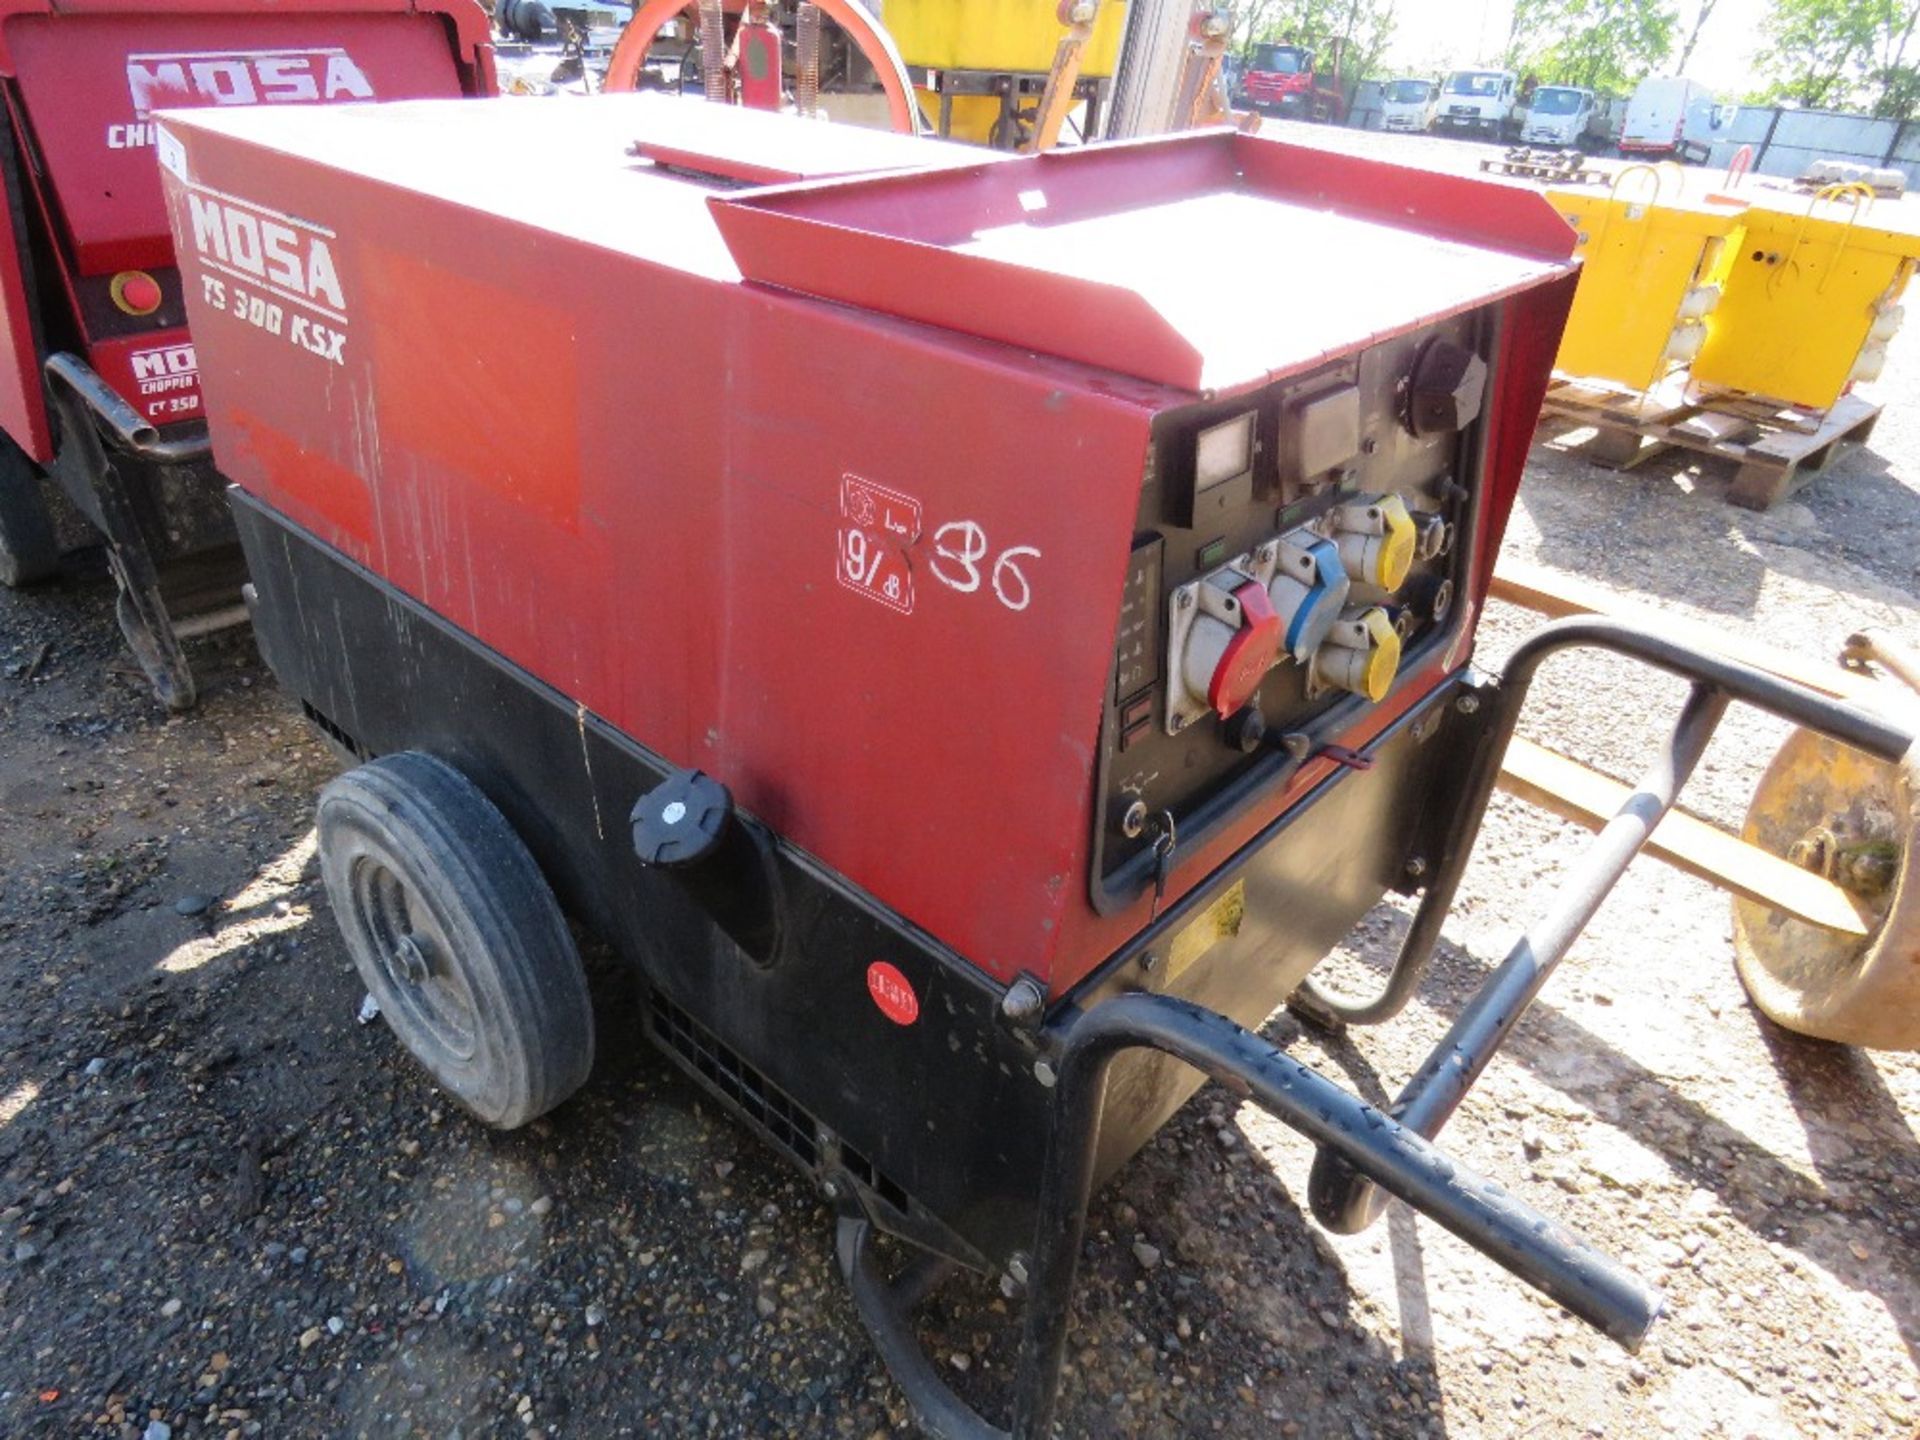 MOSA TS300 BARROW GENERATOR. WHEN TESTED WAS SEEN TO RUN AND SHOWED POWER. DIRECT FROM LOCAL COMPANY